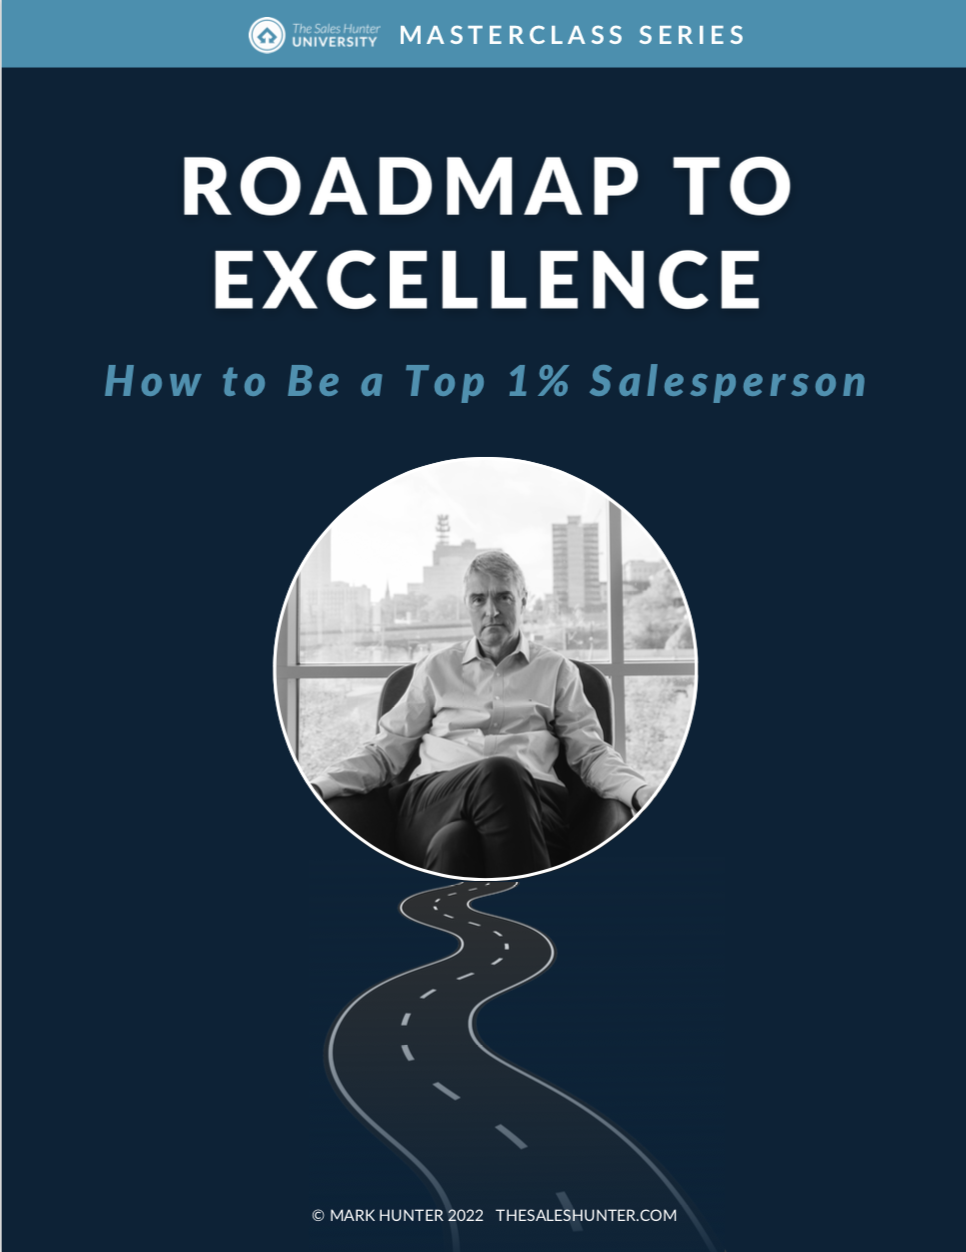 Roadmapping excellence